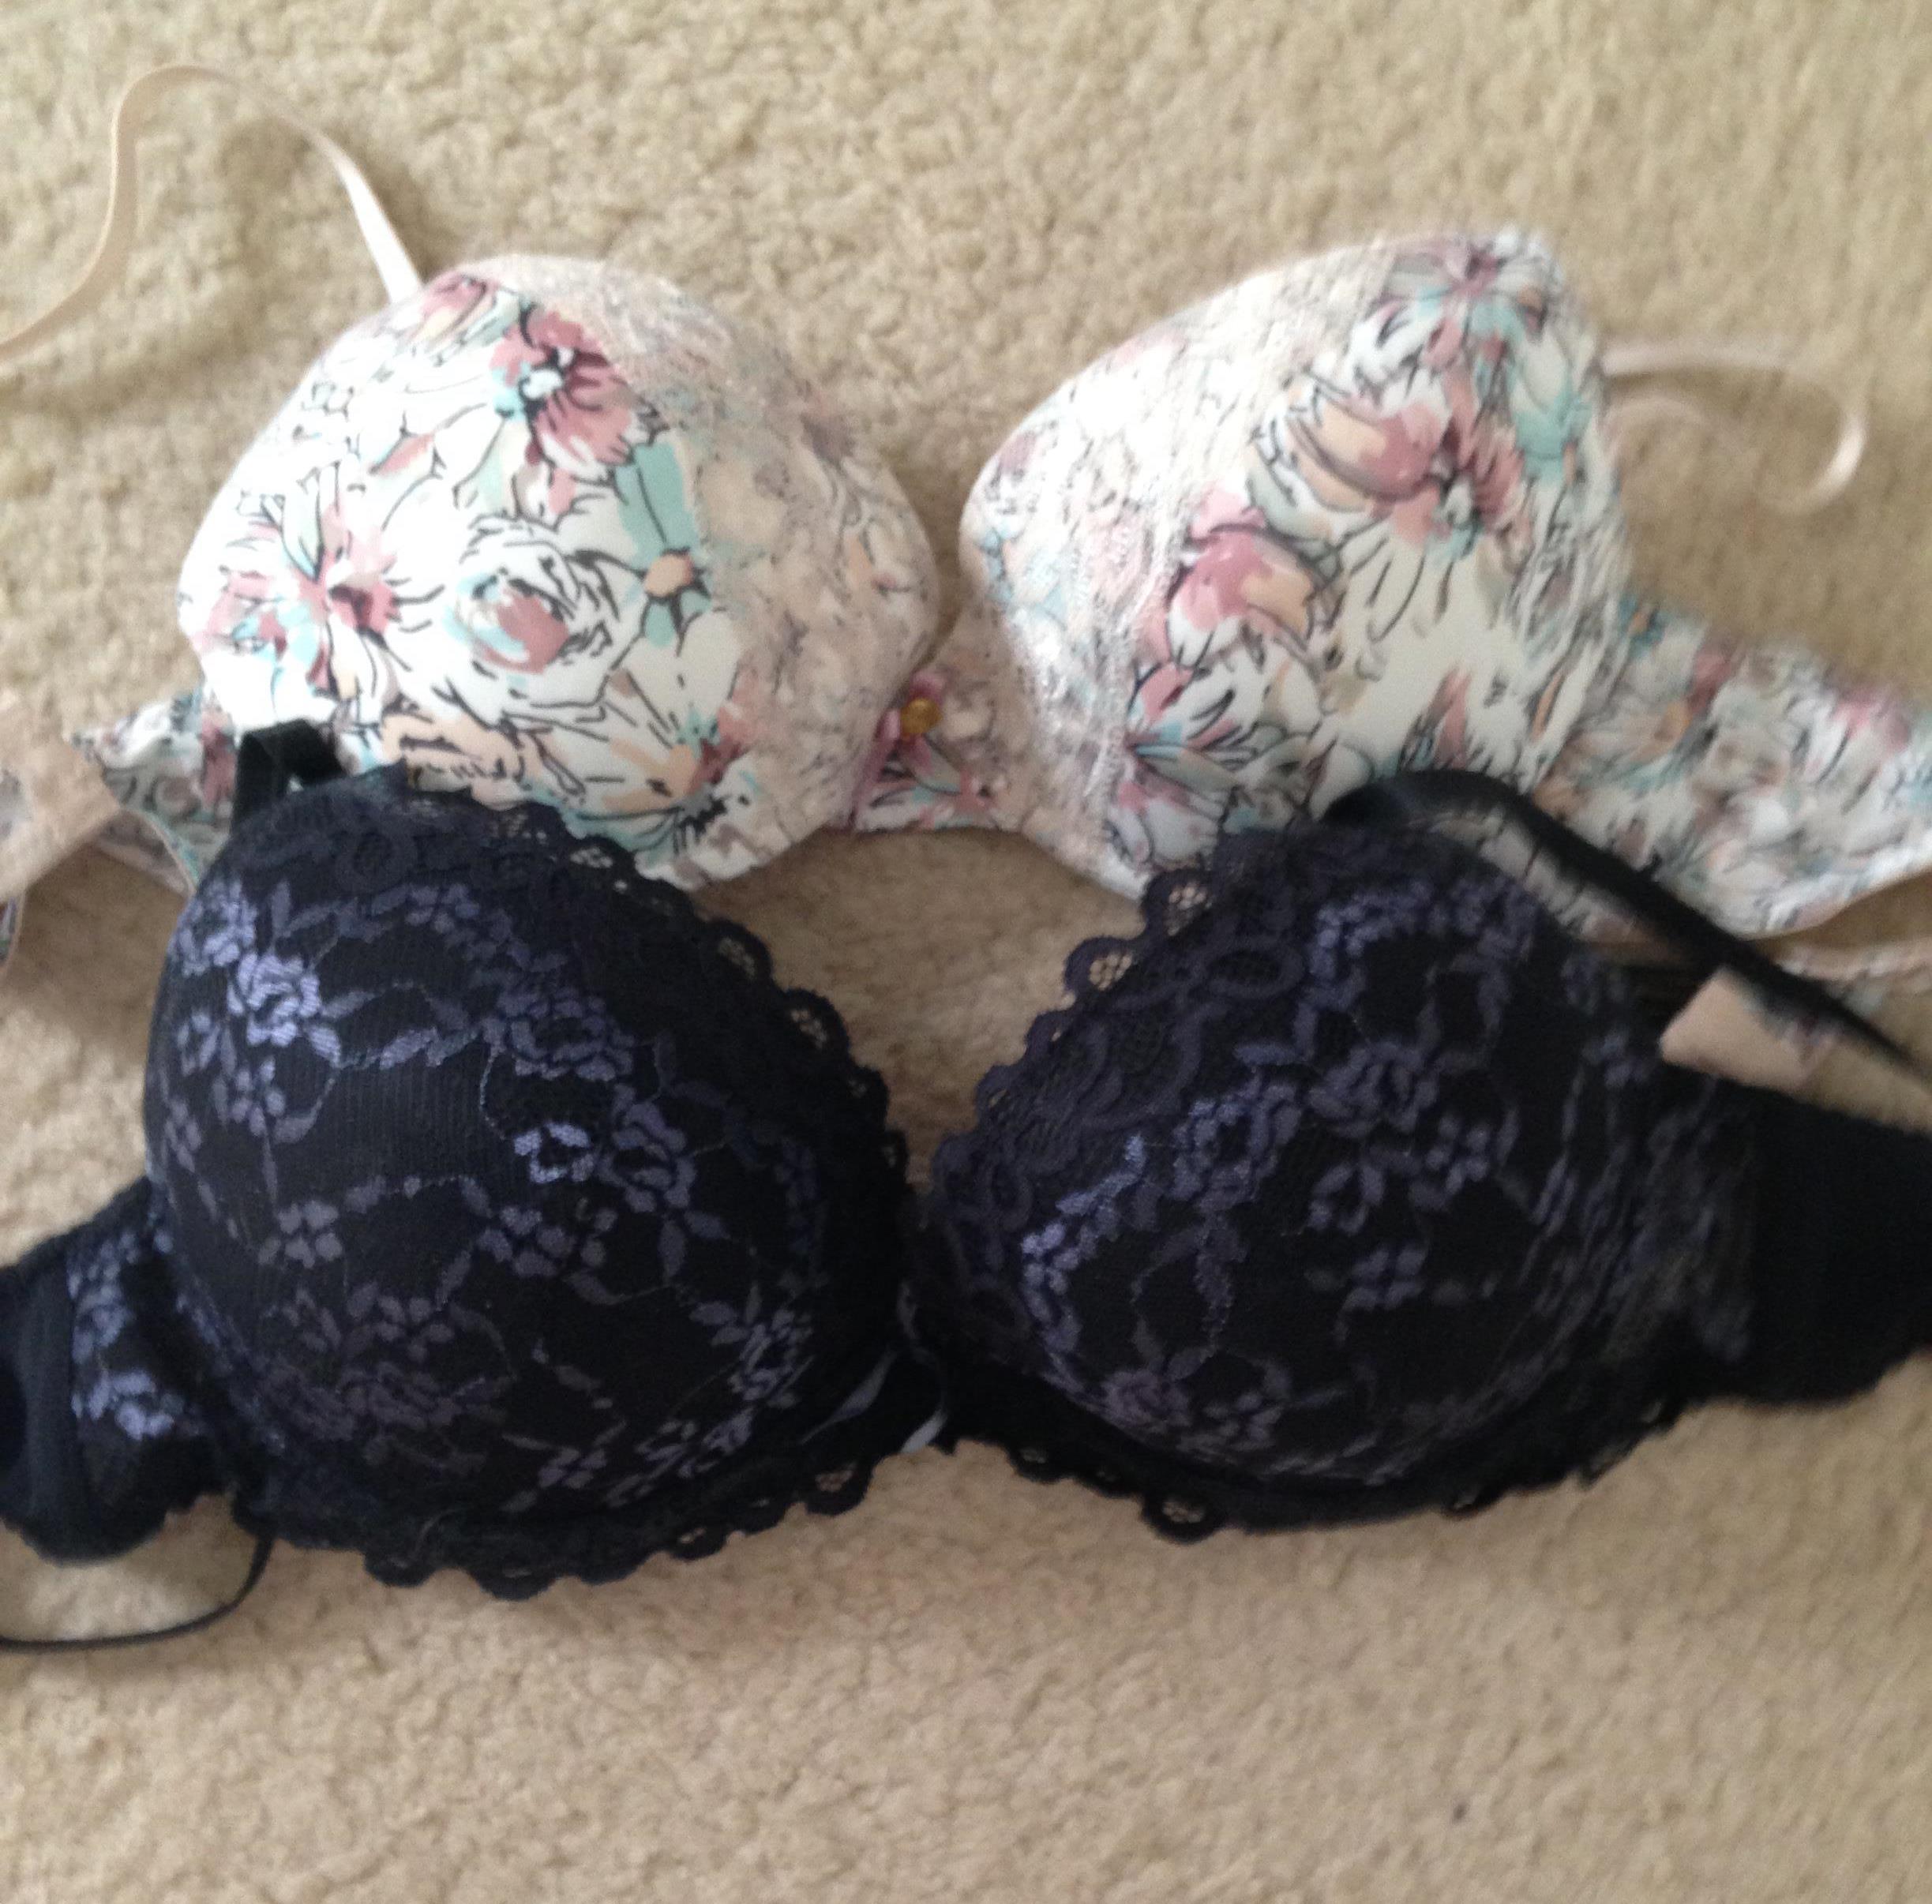 https://atypical60.com/wp-content/uploads/2015/03/marilyn-monroe-bras-from-tj-maxx-at-5-99-each-my-new-favorite-bras.jpg